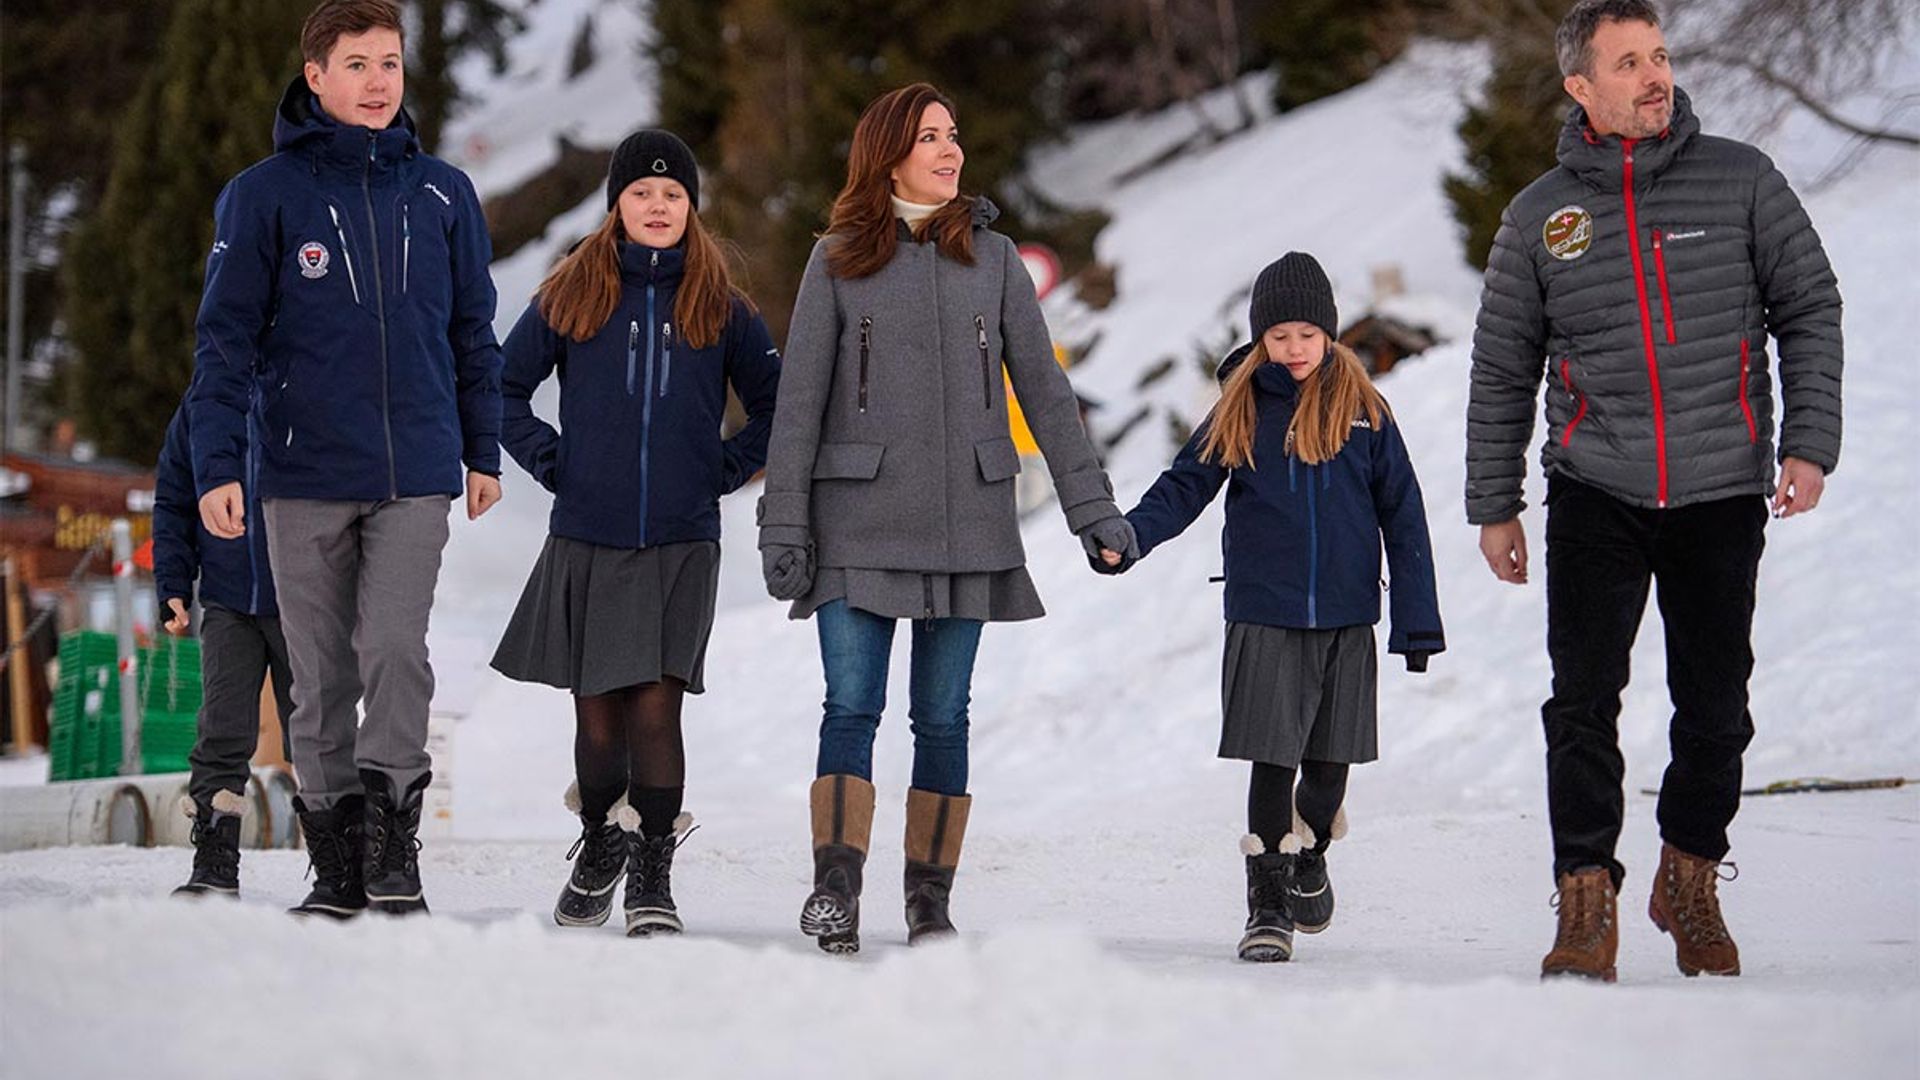 Denmark's Crown Princess Mary shares video of her children's fun half-term activity